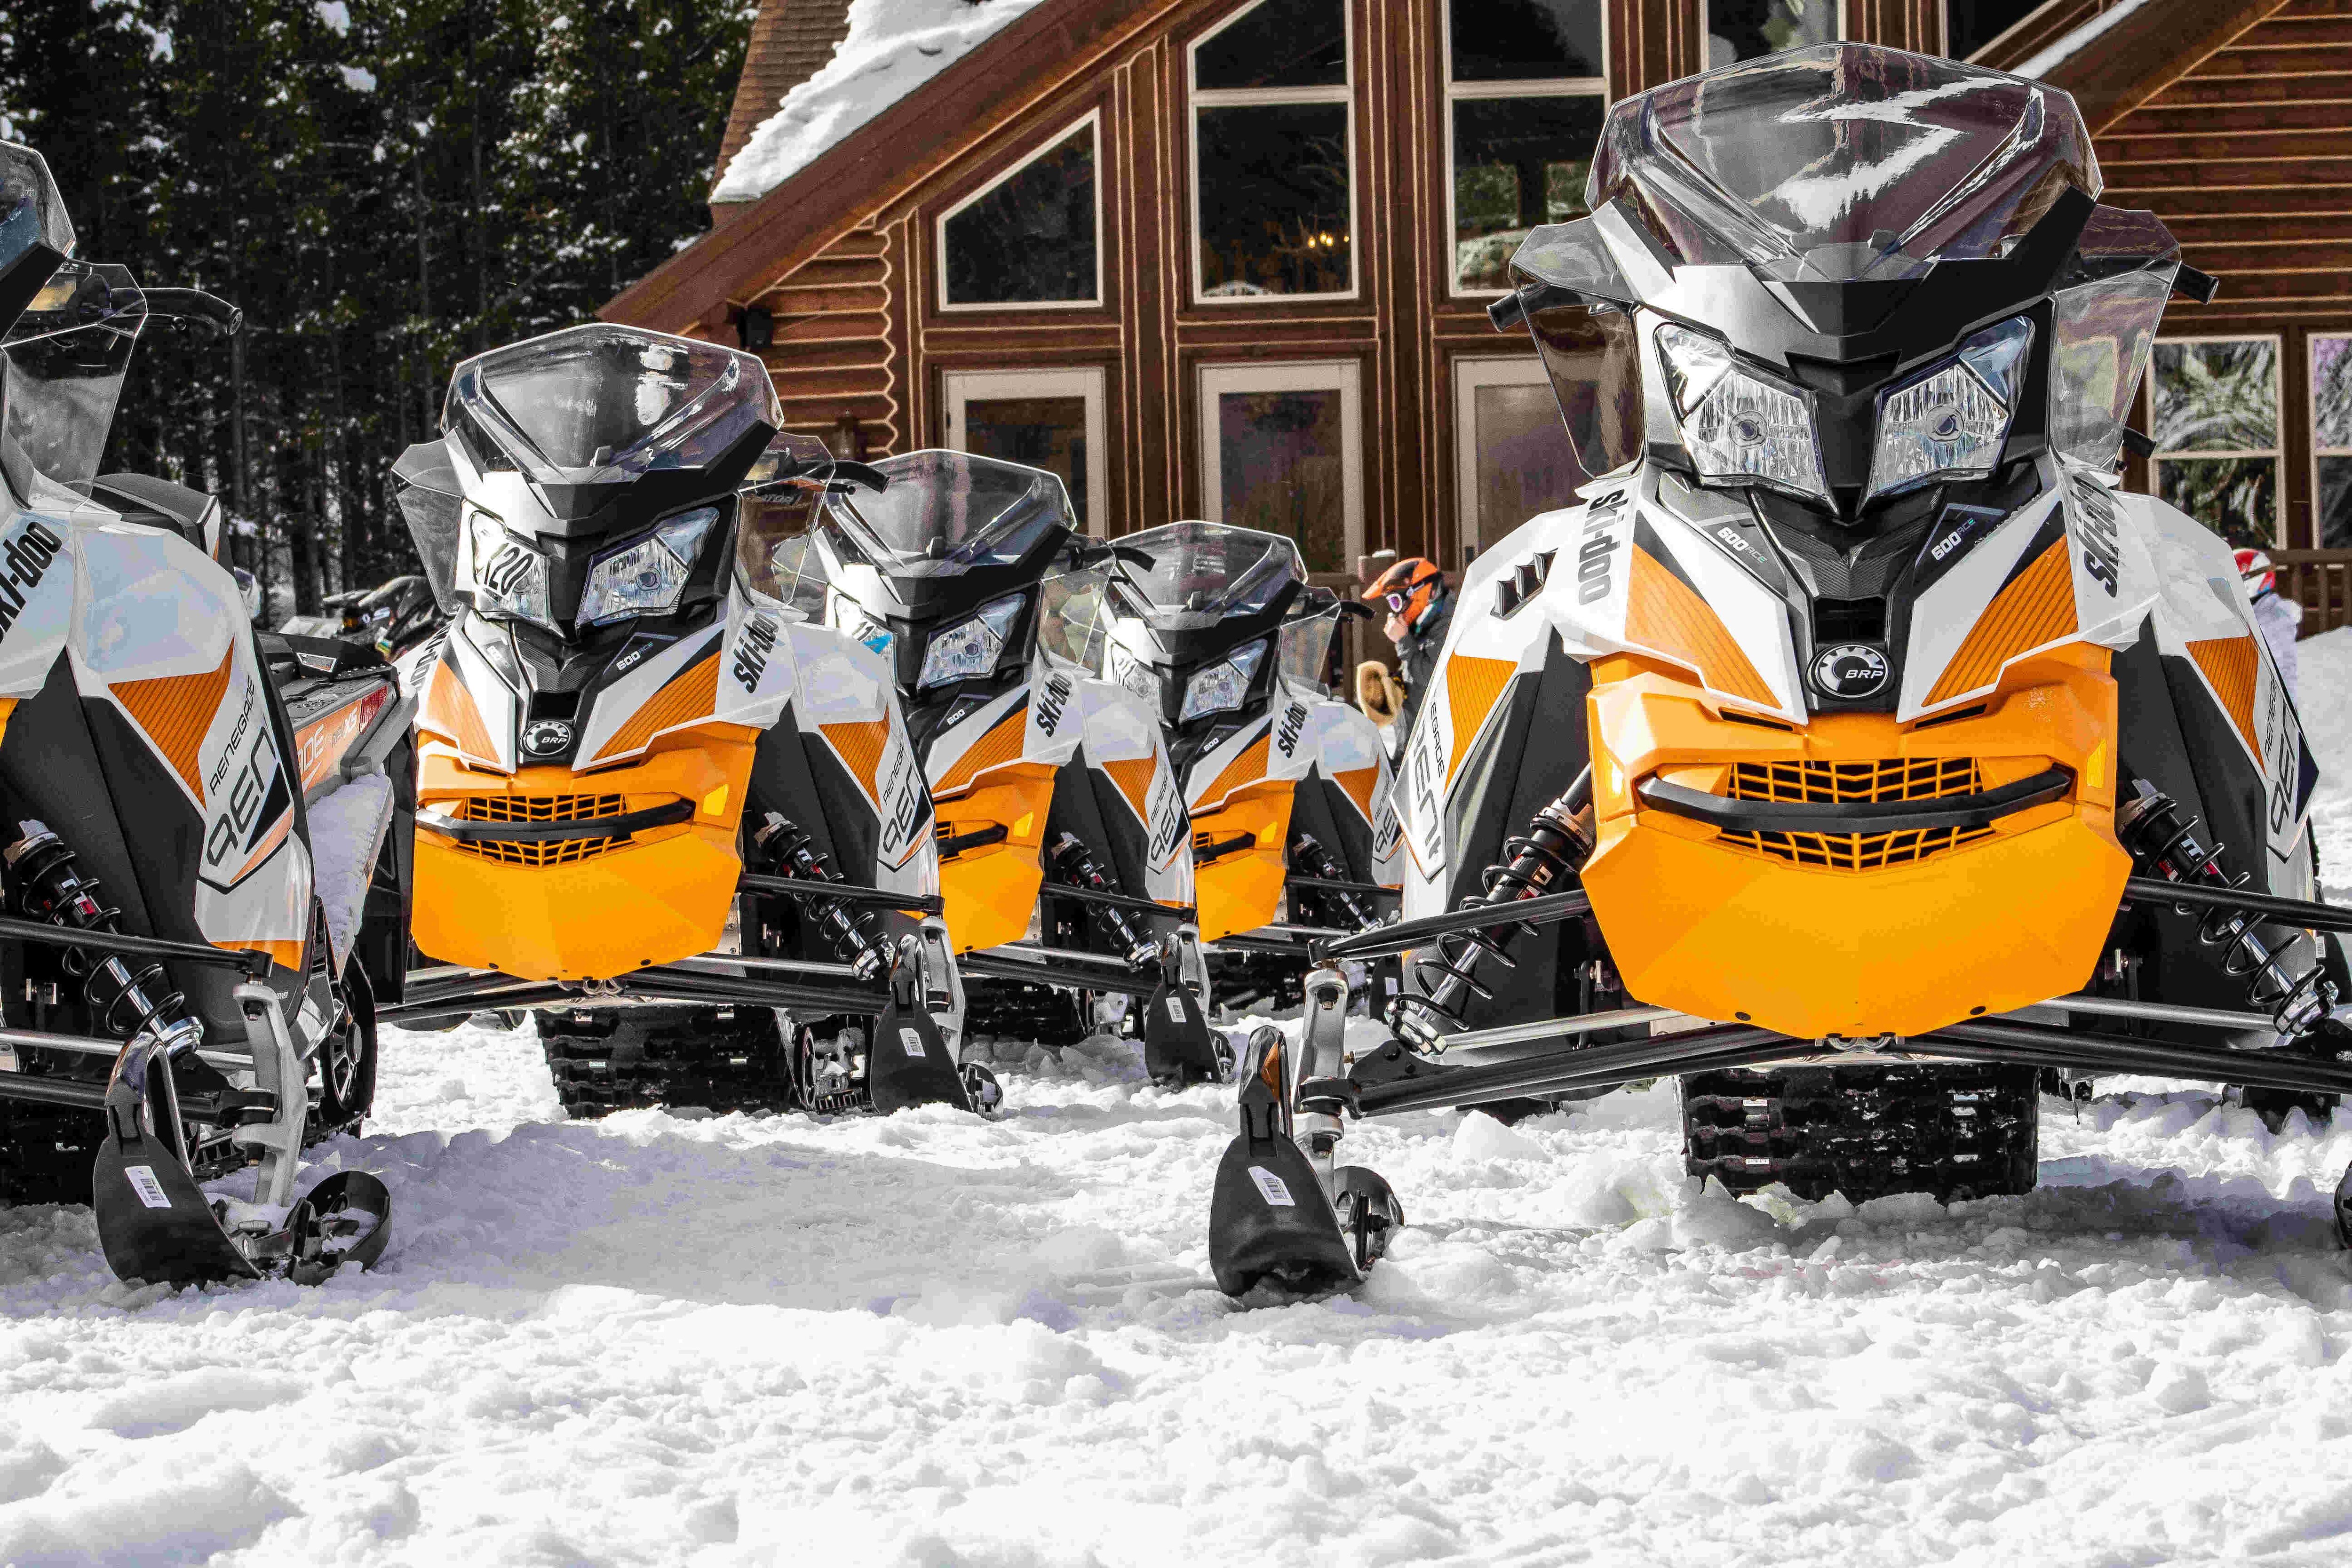 A line of Ski-doo's parked on the snow outside of a lodge cabin